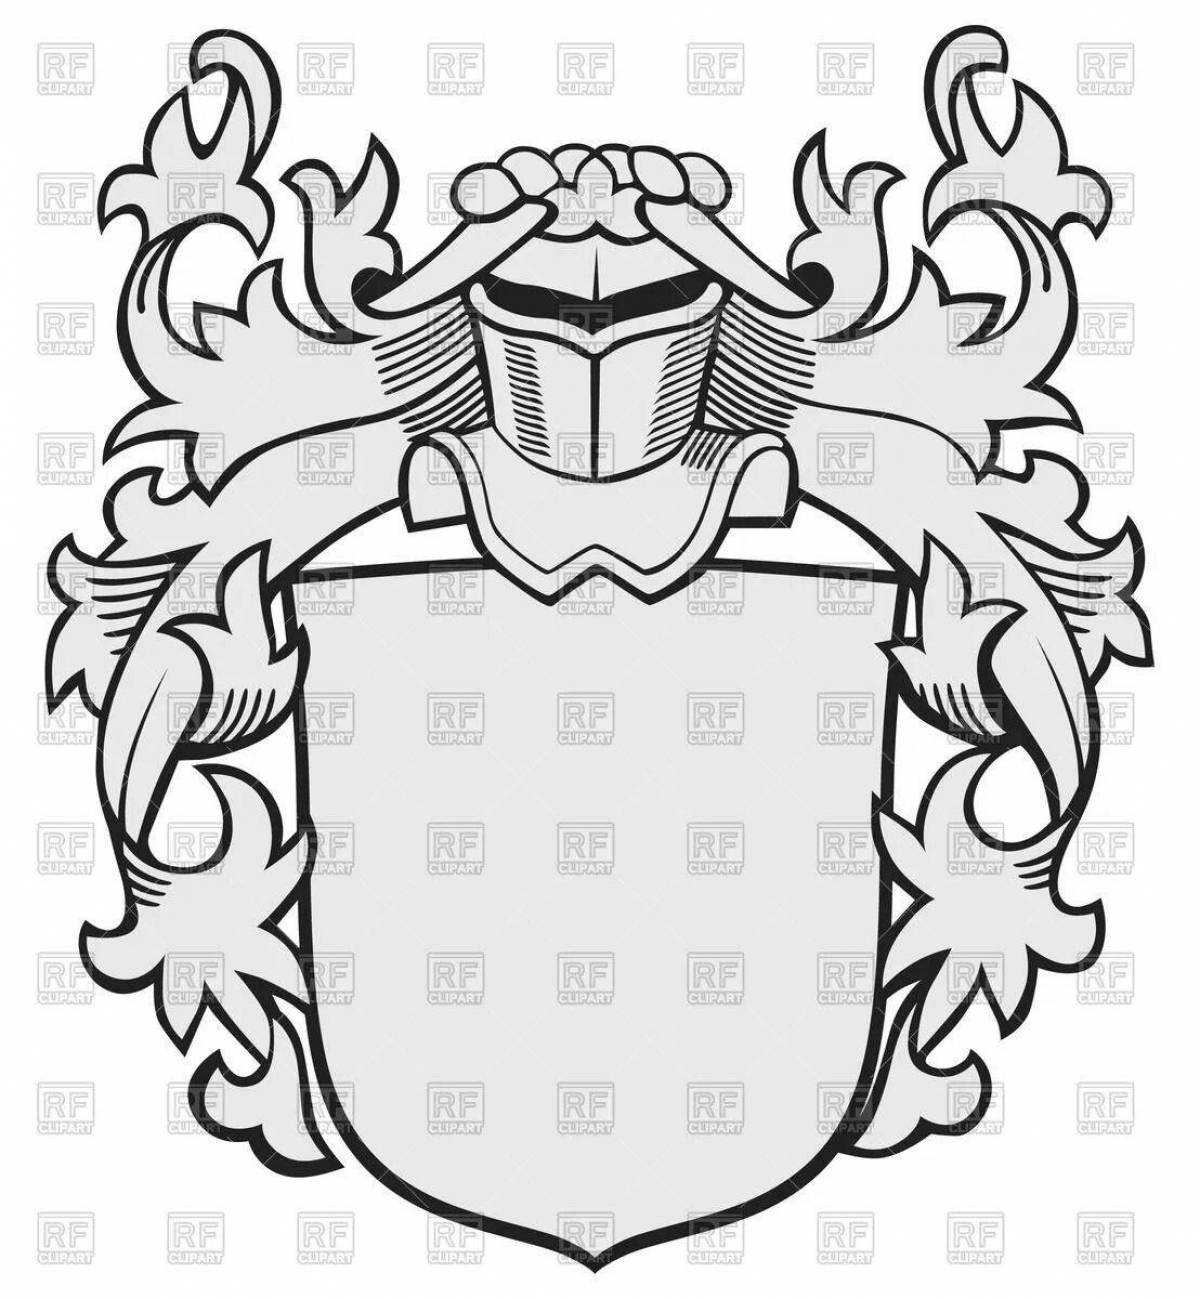 Great coloring of the knight's coat of arms